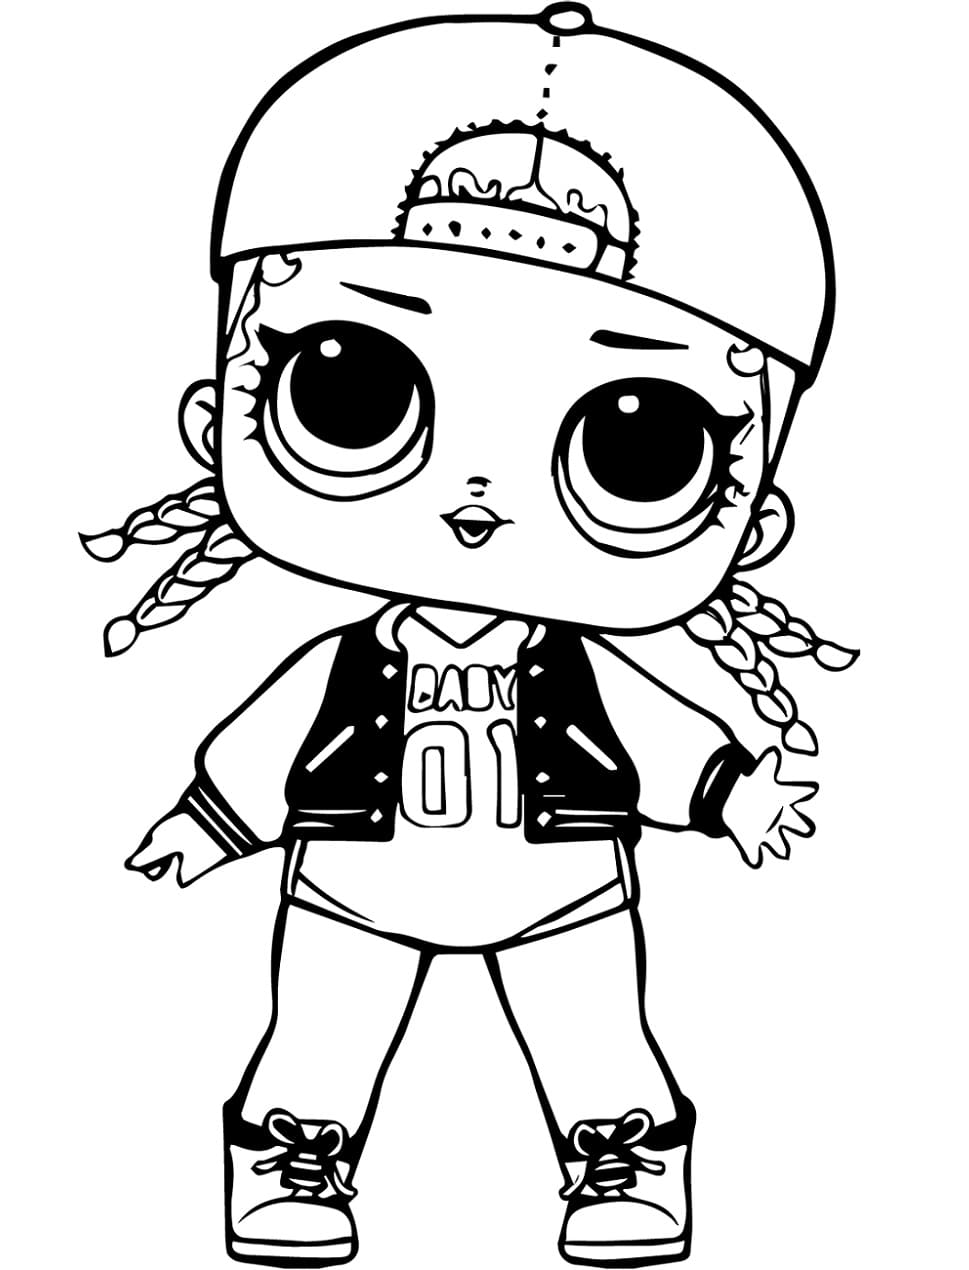 M.C. Swag Lol Surprise Doll coloring page